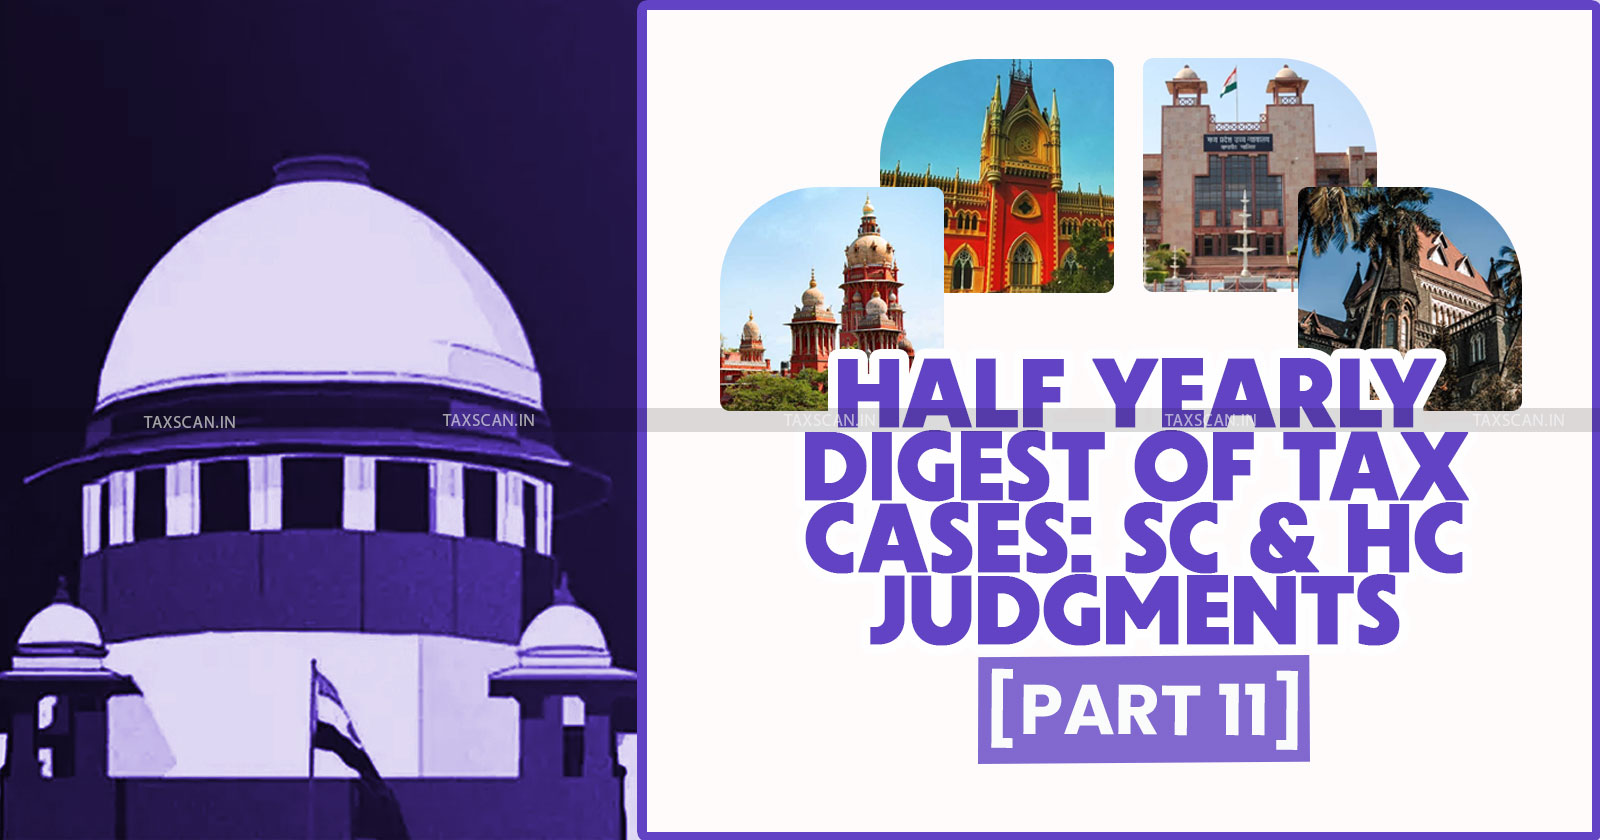 Half Yearly Digest of Tax Cases - Supreme Court and High Court Judgments - taxscan